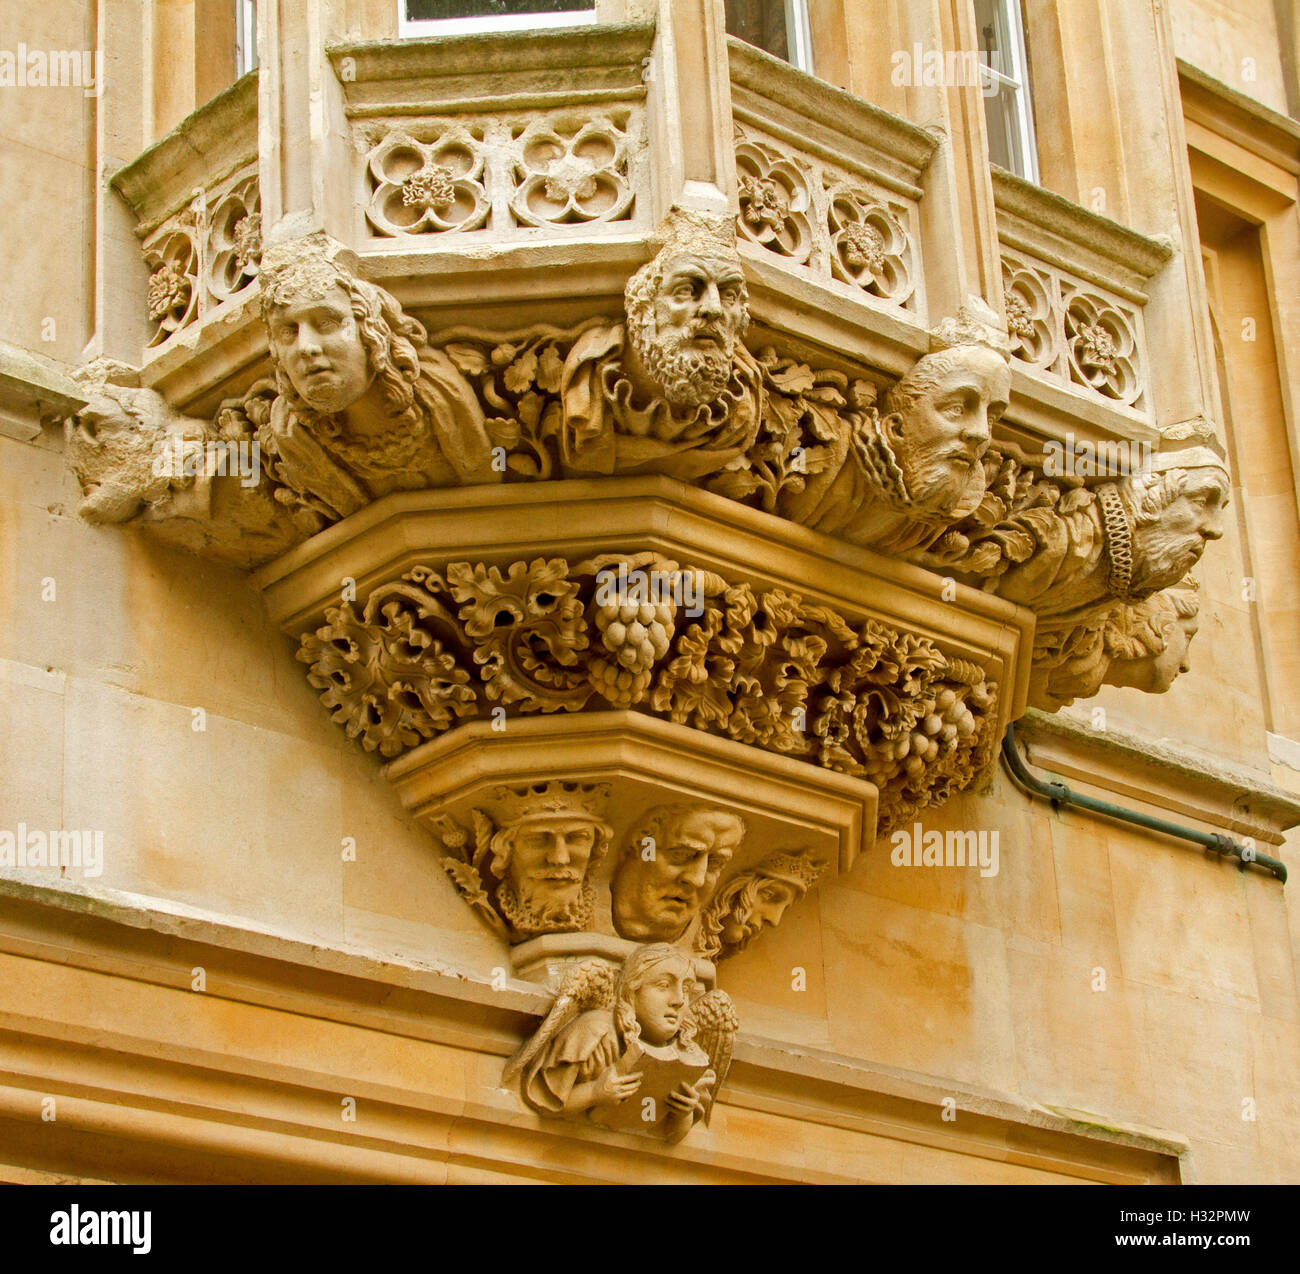 Ornate gothic style sculptural work on support of bay window of historic building  of Pembroke college in Oxford England UK Stock Photo